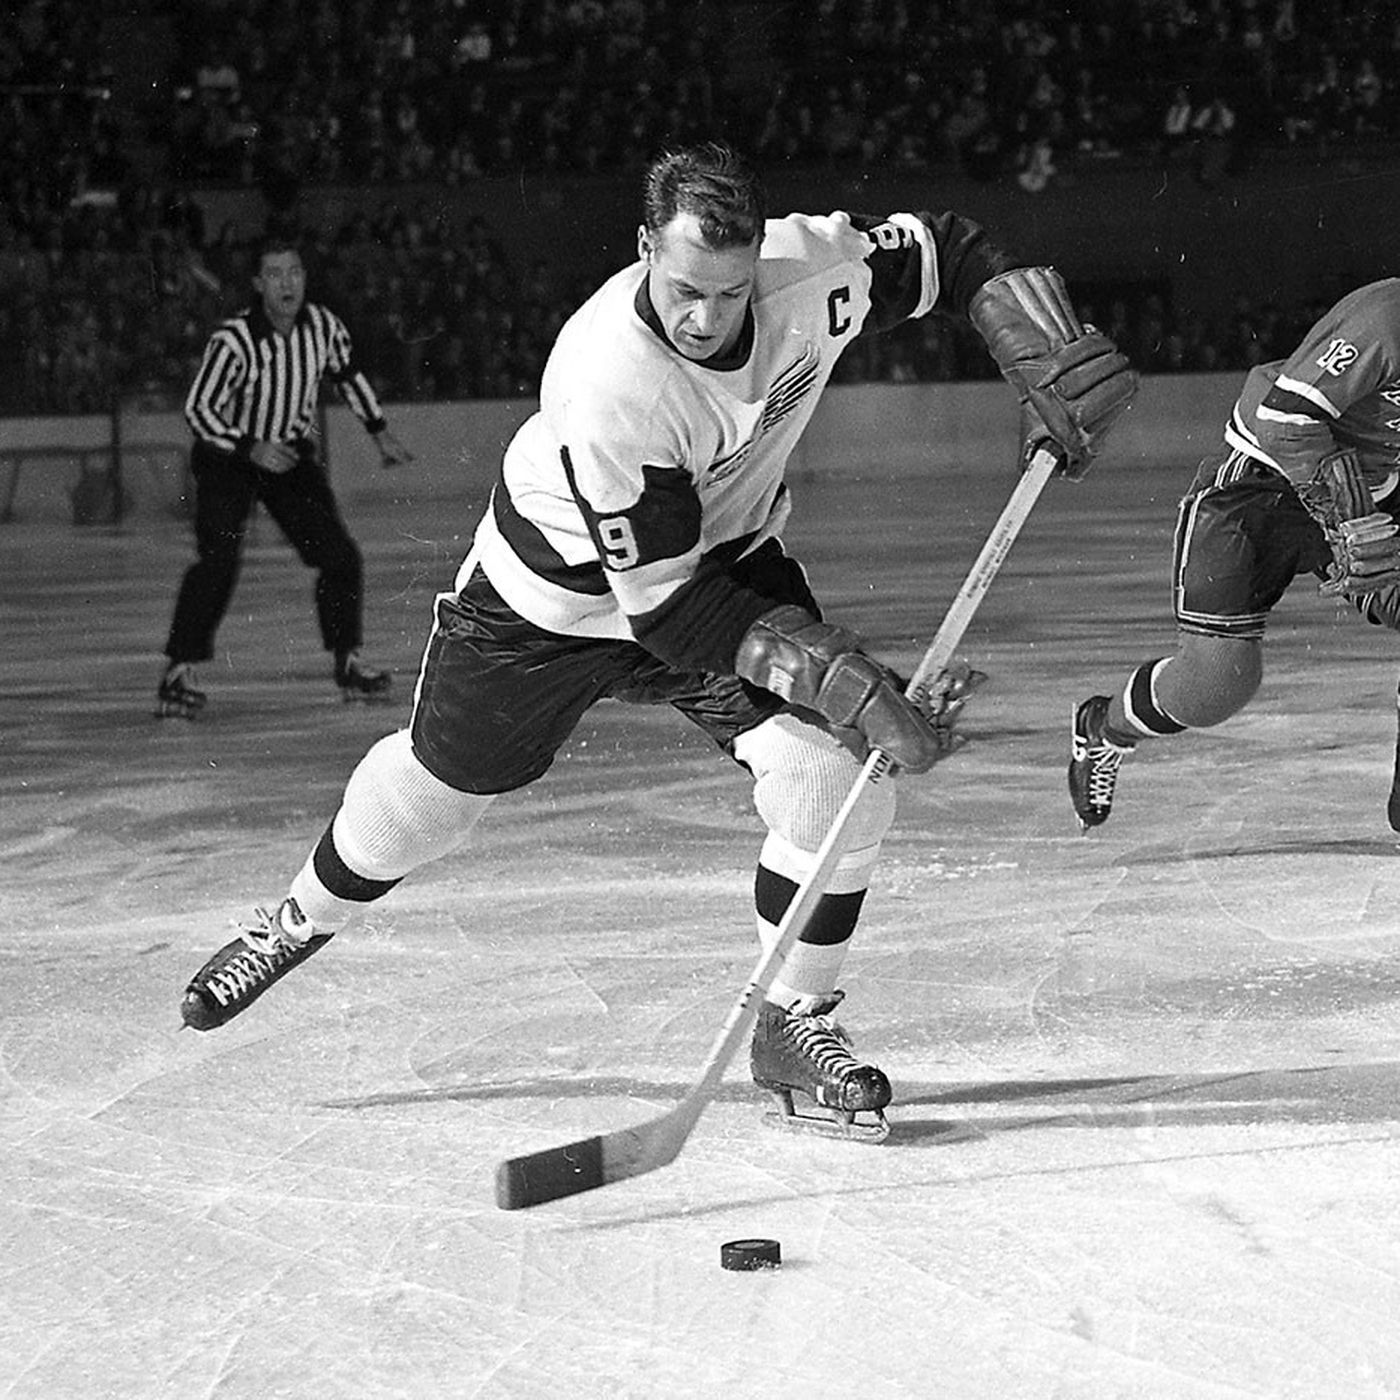 “You find that you have peace of mind and can enjoy yourself, get more sleep, and rest when you know that it was a one hundred percent effort that you gave – win or lose.” 

– Gordie Howe